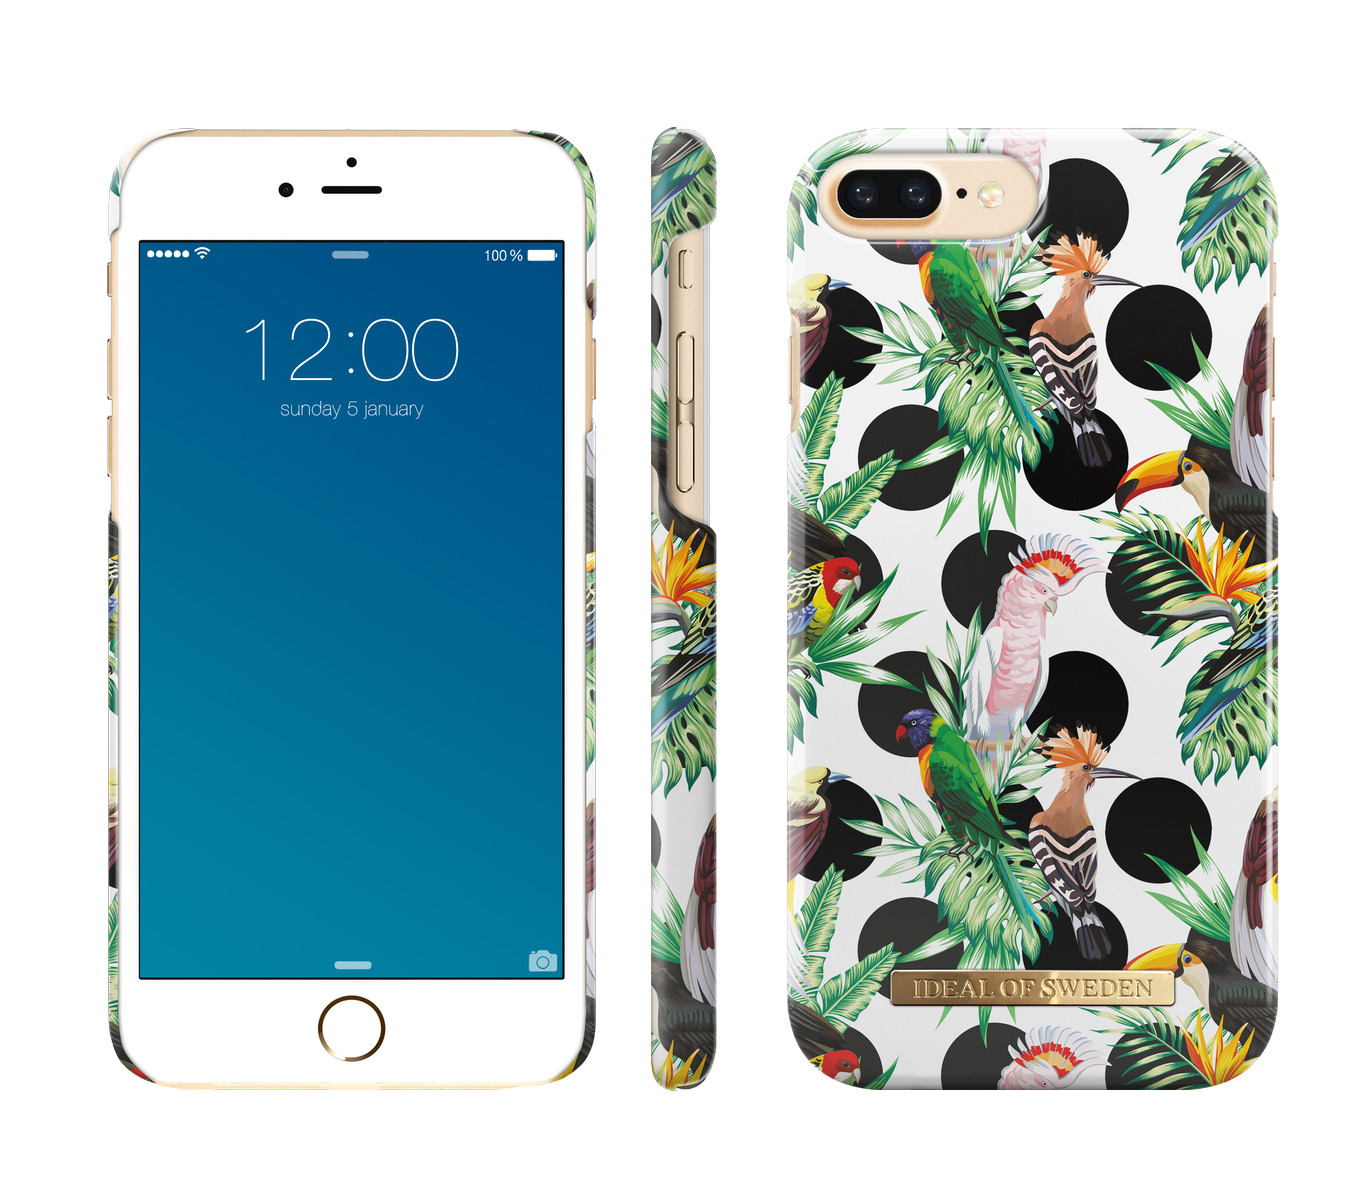 OF Tropical Fashion, Backcover, iPhone ,iPhone Apple, SWEDEN Dots Plus 8 Plus, IDEAL 7 iPhone Plus, 6